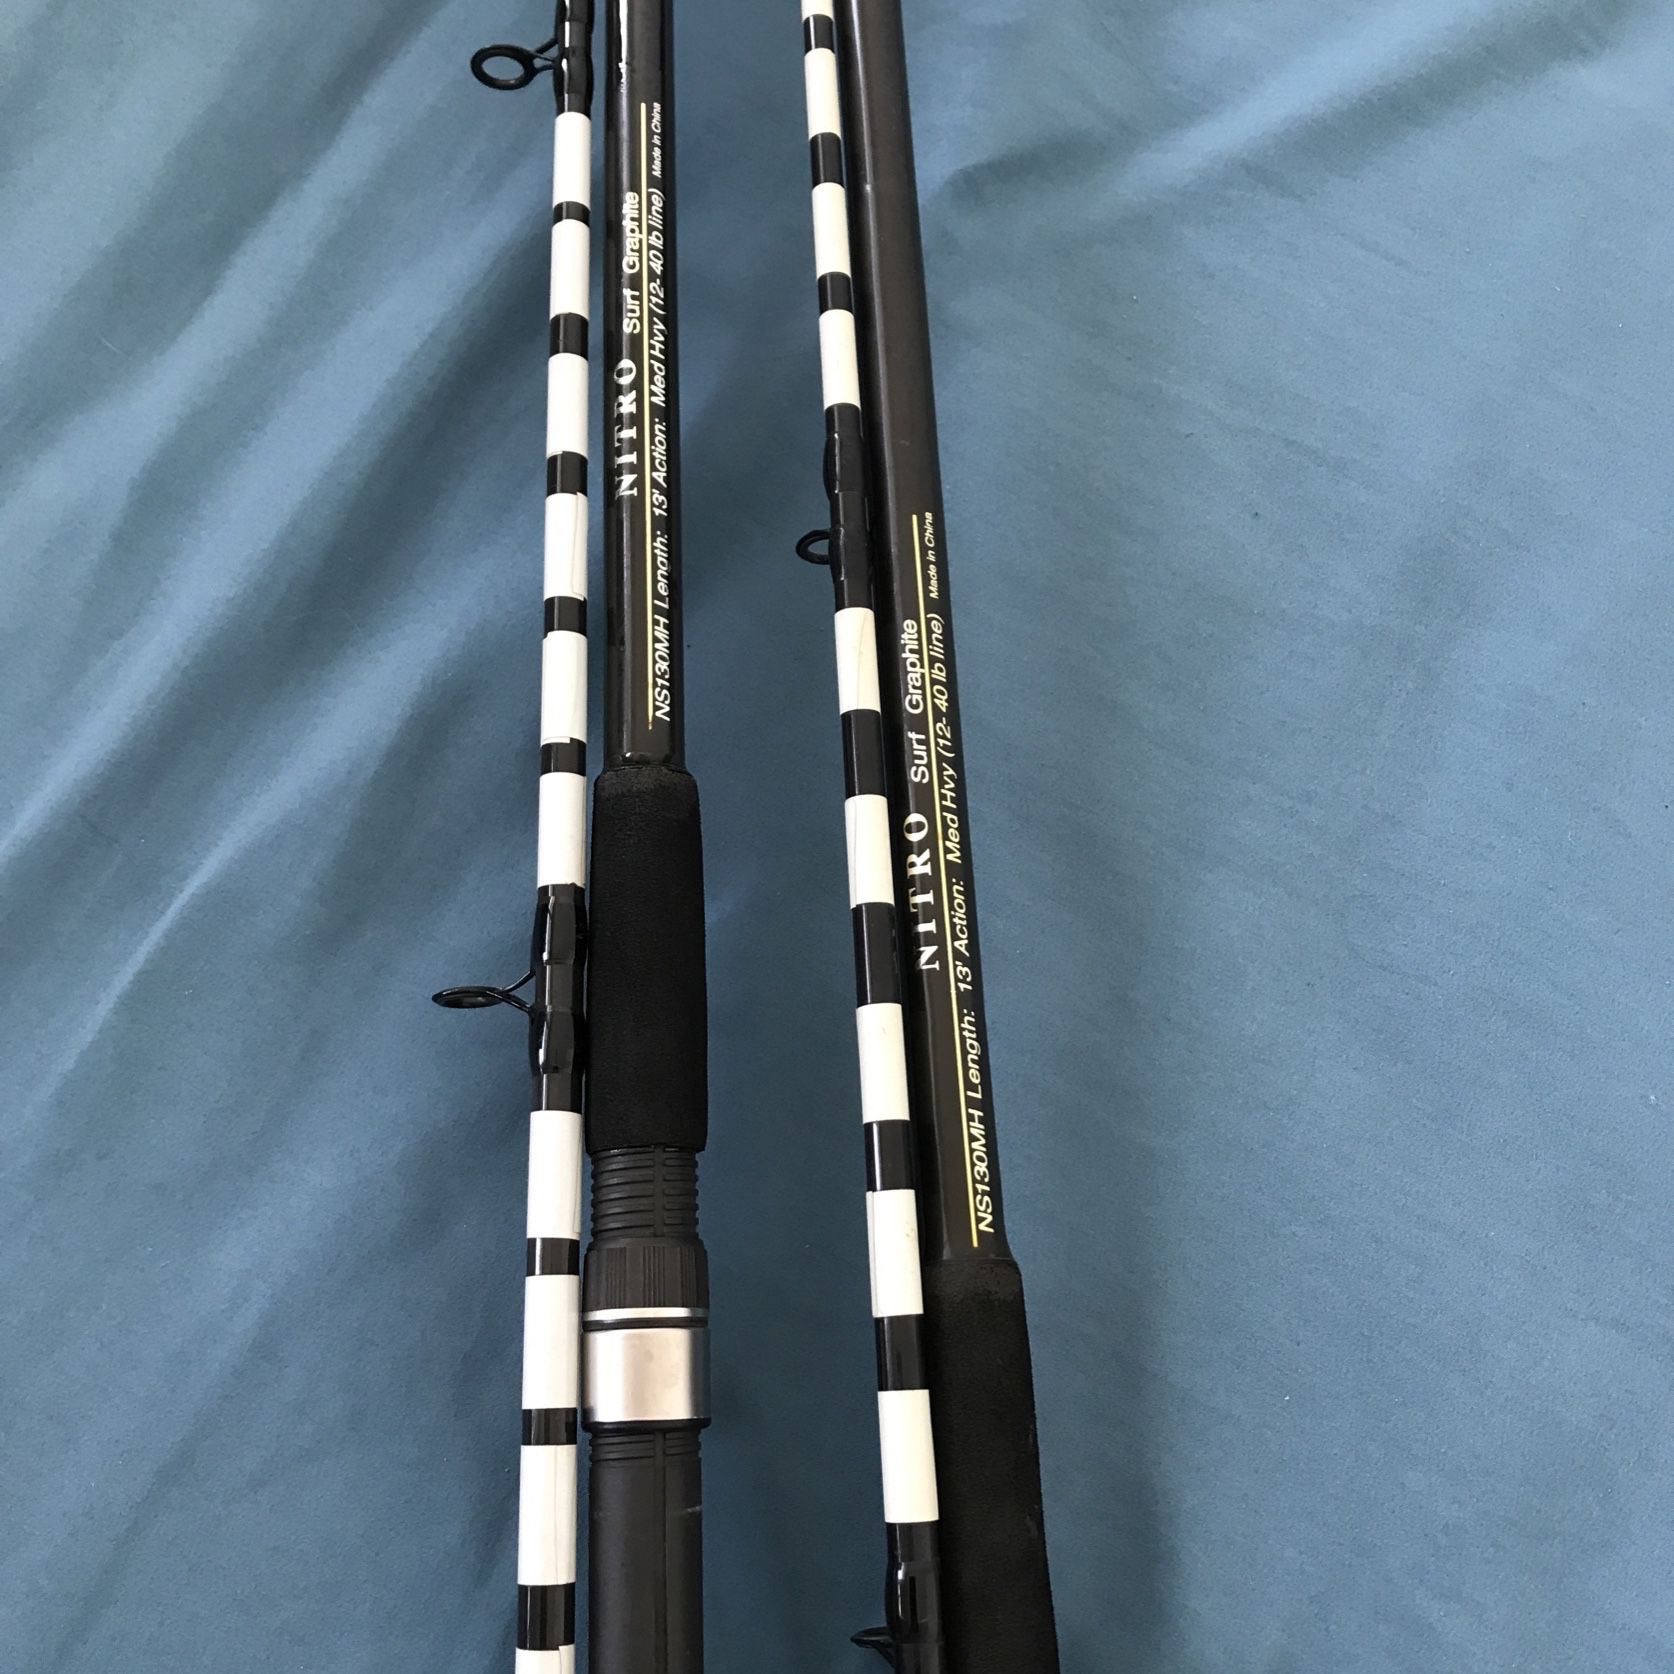 2 Nitro 13' MH Surf Rods for Sale in Pearl City, HI - OfferUp